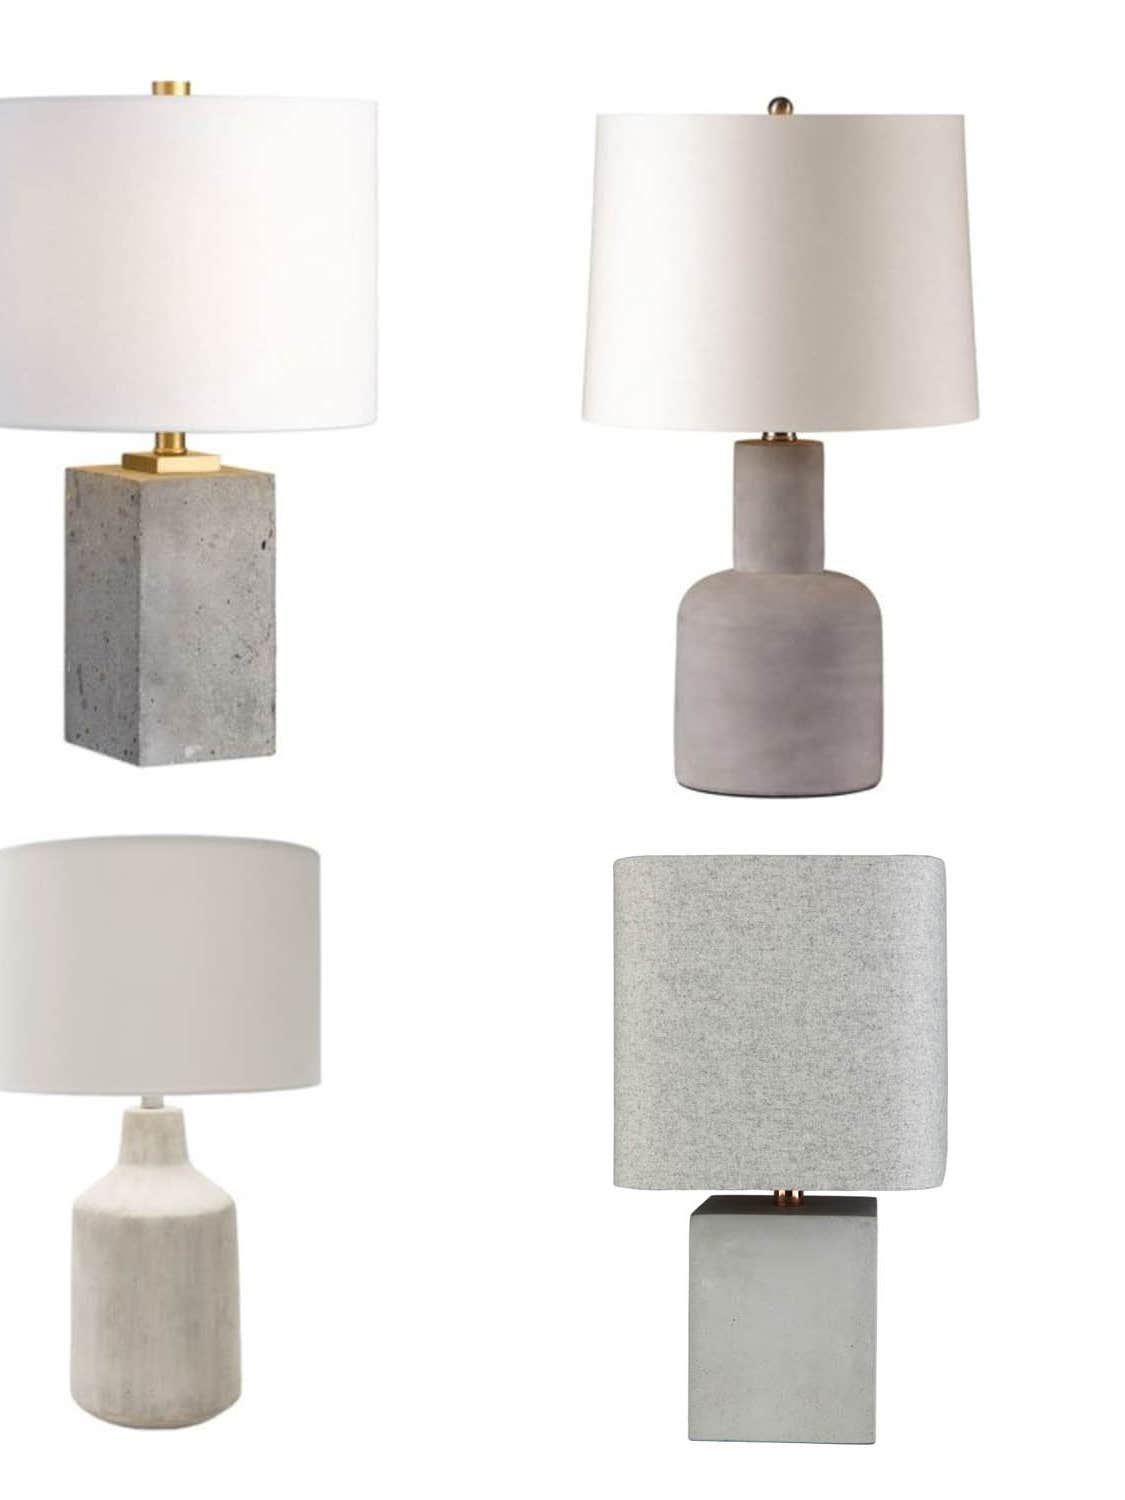 assortment of table lamps with concrete base